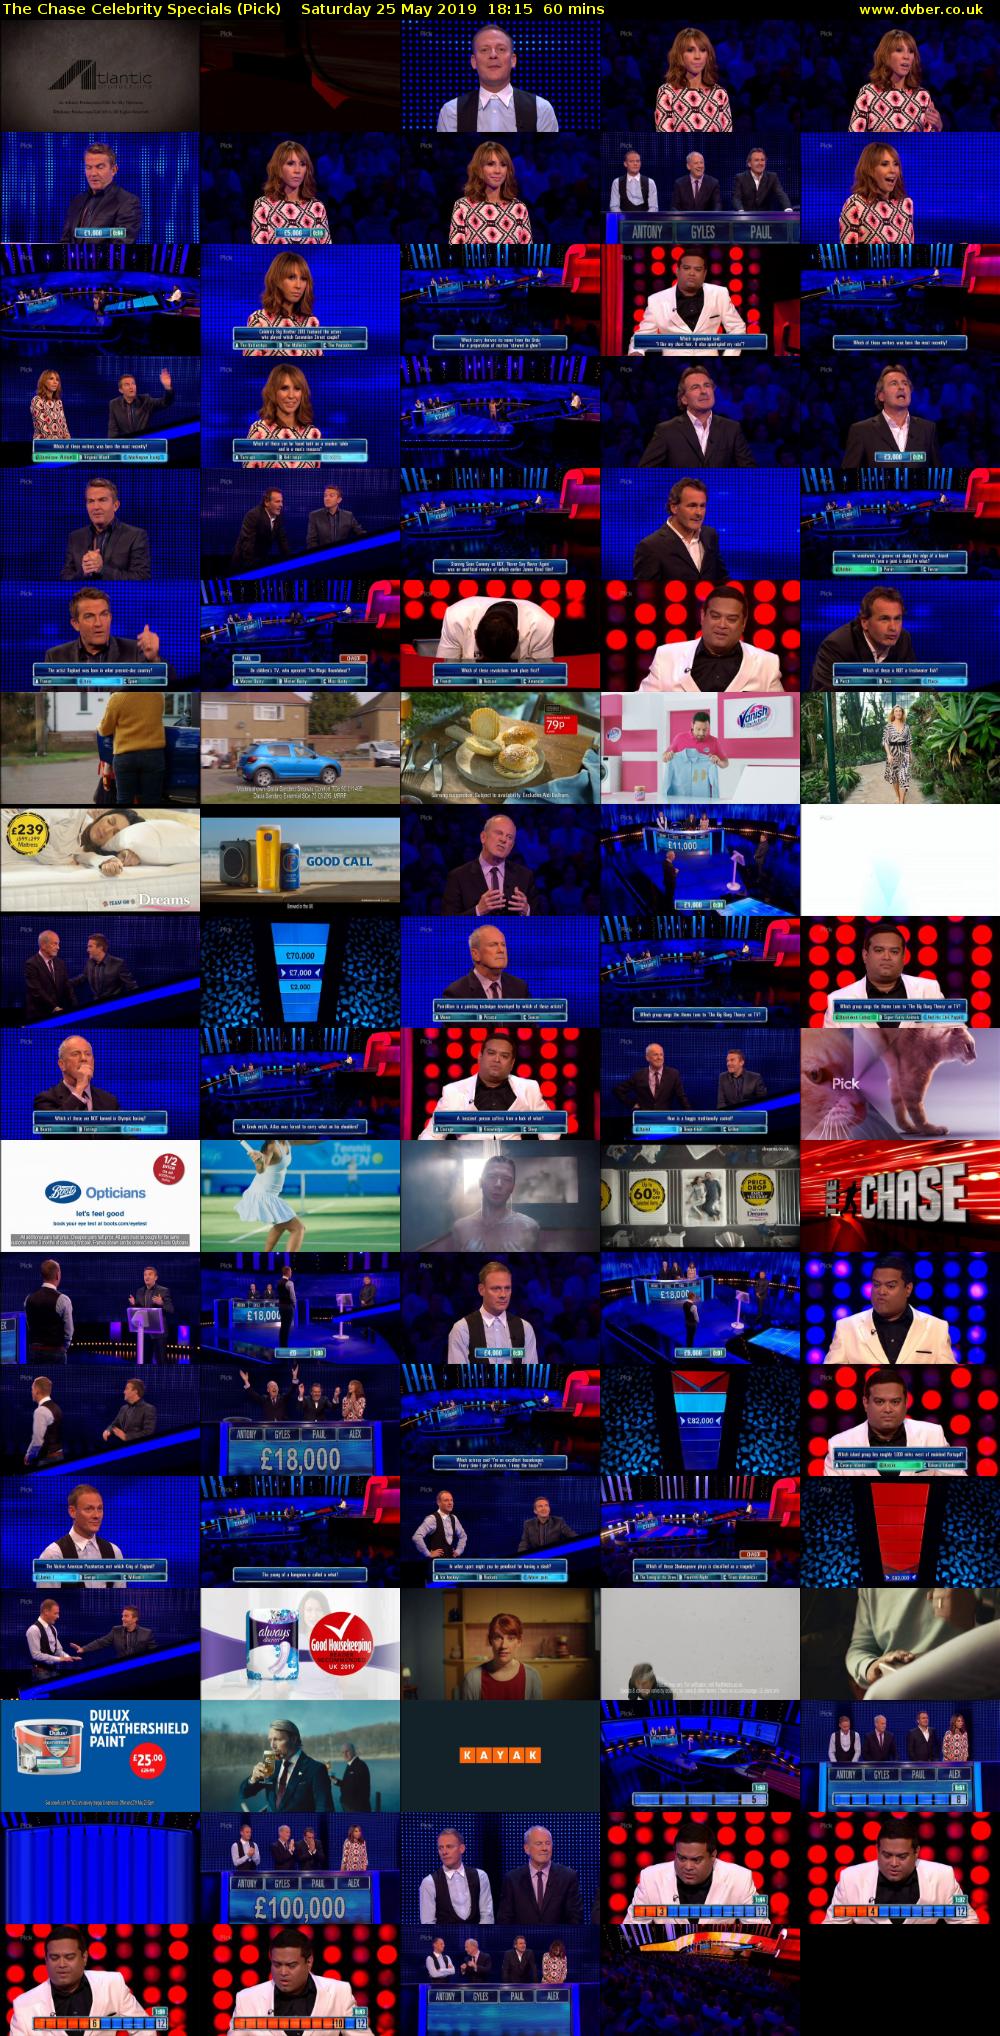 The Chase Celebrity Specials (Pick) Saturday 25 May 2019 18:15 - 19:15